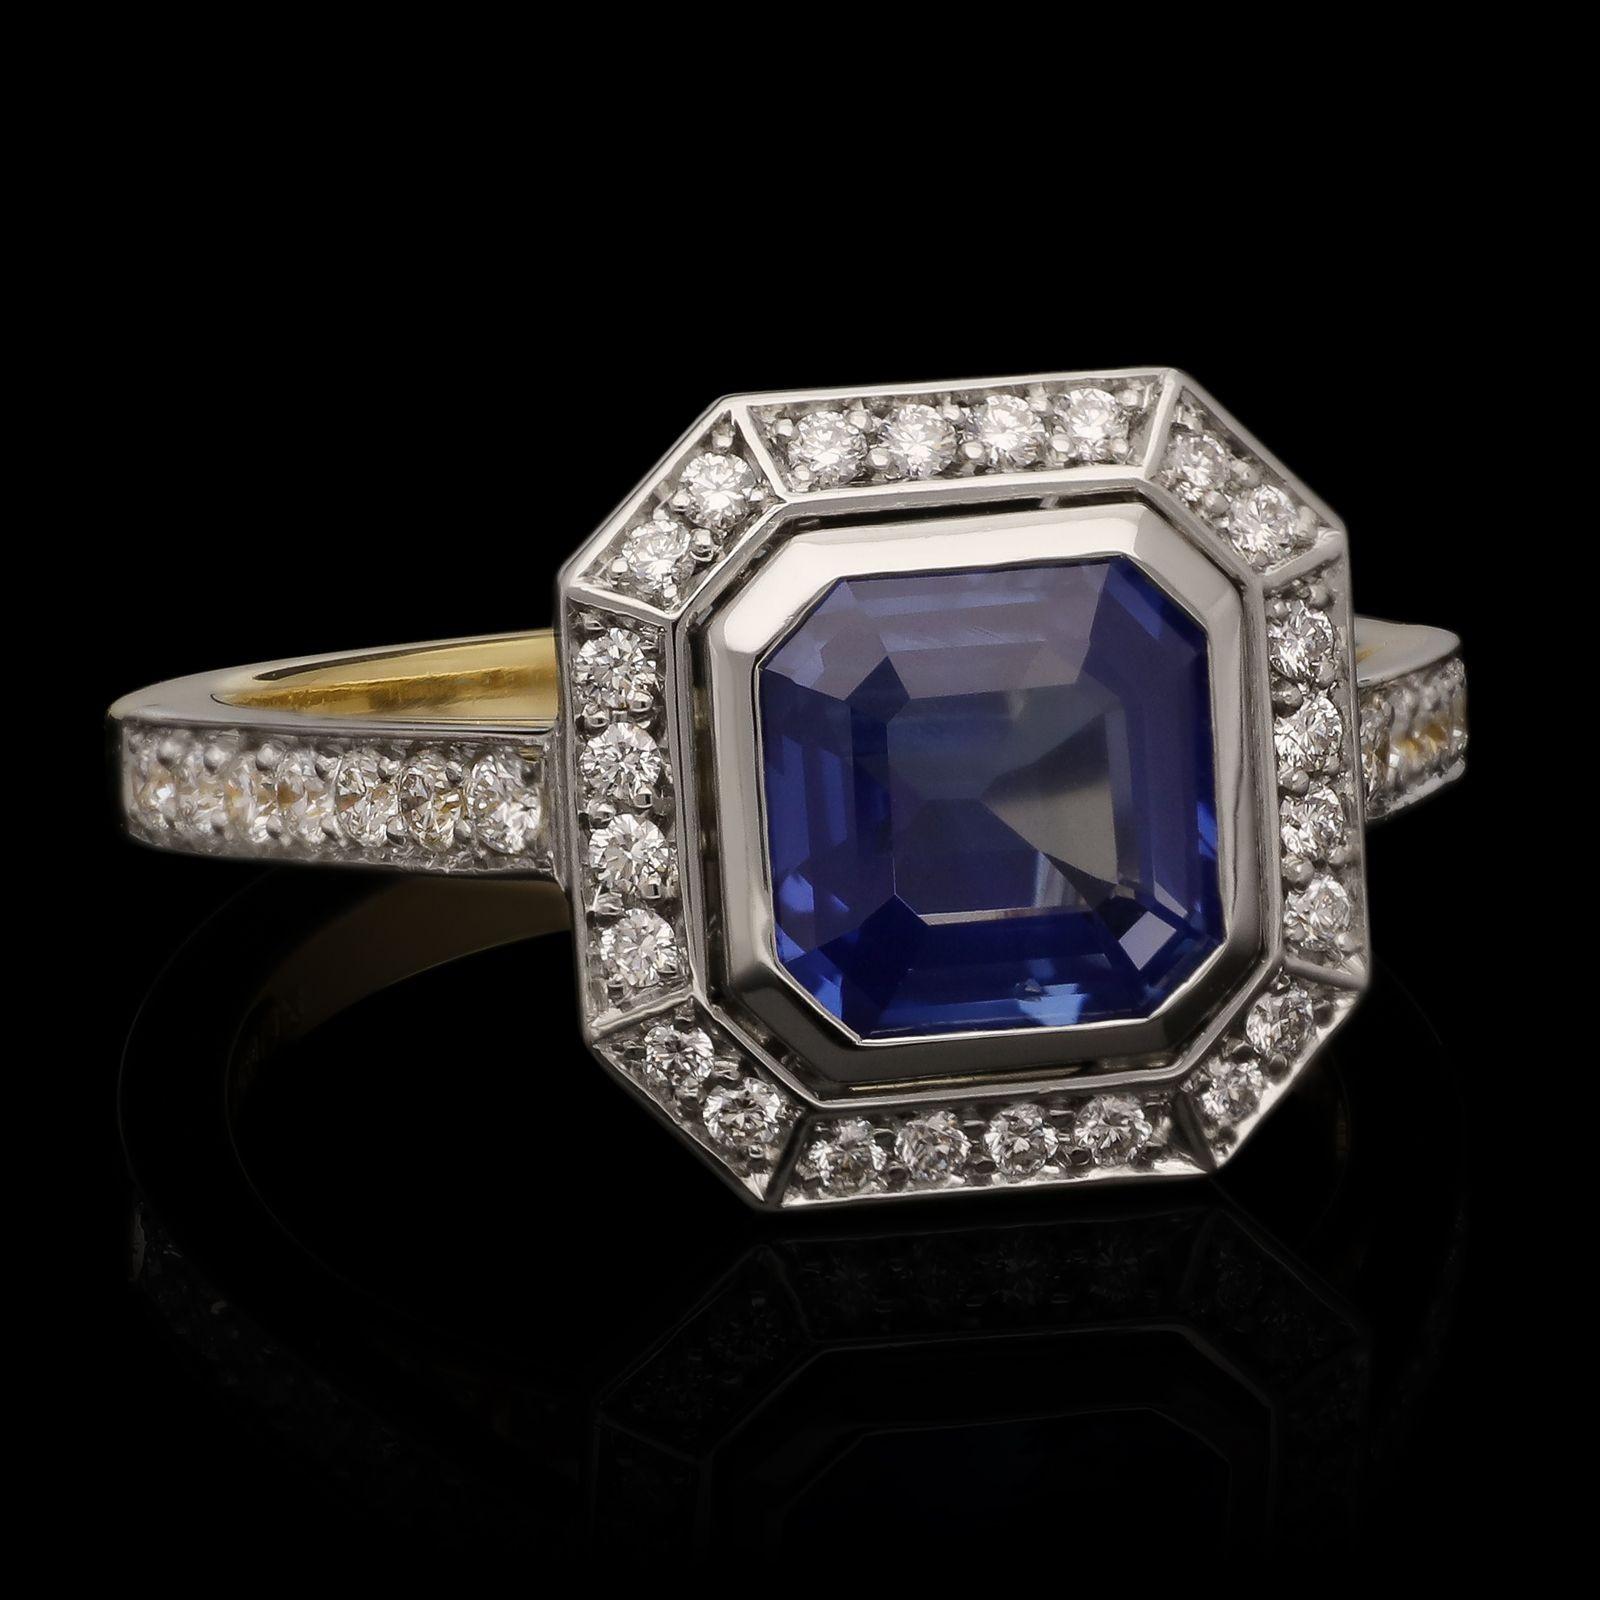 A beautiful geometric sapphire and diamond halo ring by Hancocks, centred with an octagonal step cut unheated sapphire weighing 1.59ct in a platinum rubover setting surrounded by a detached halo of round brilliant cut diamonds all in a hand crafted